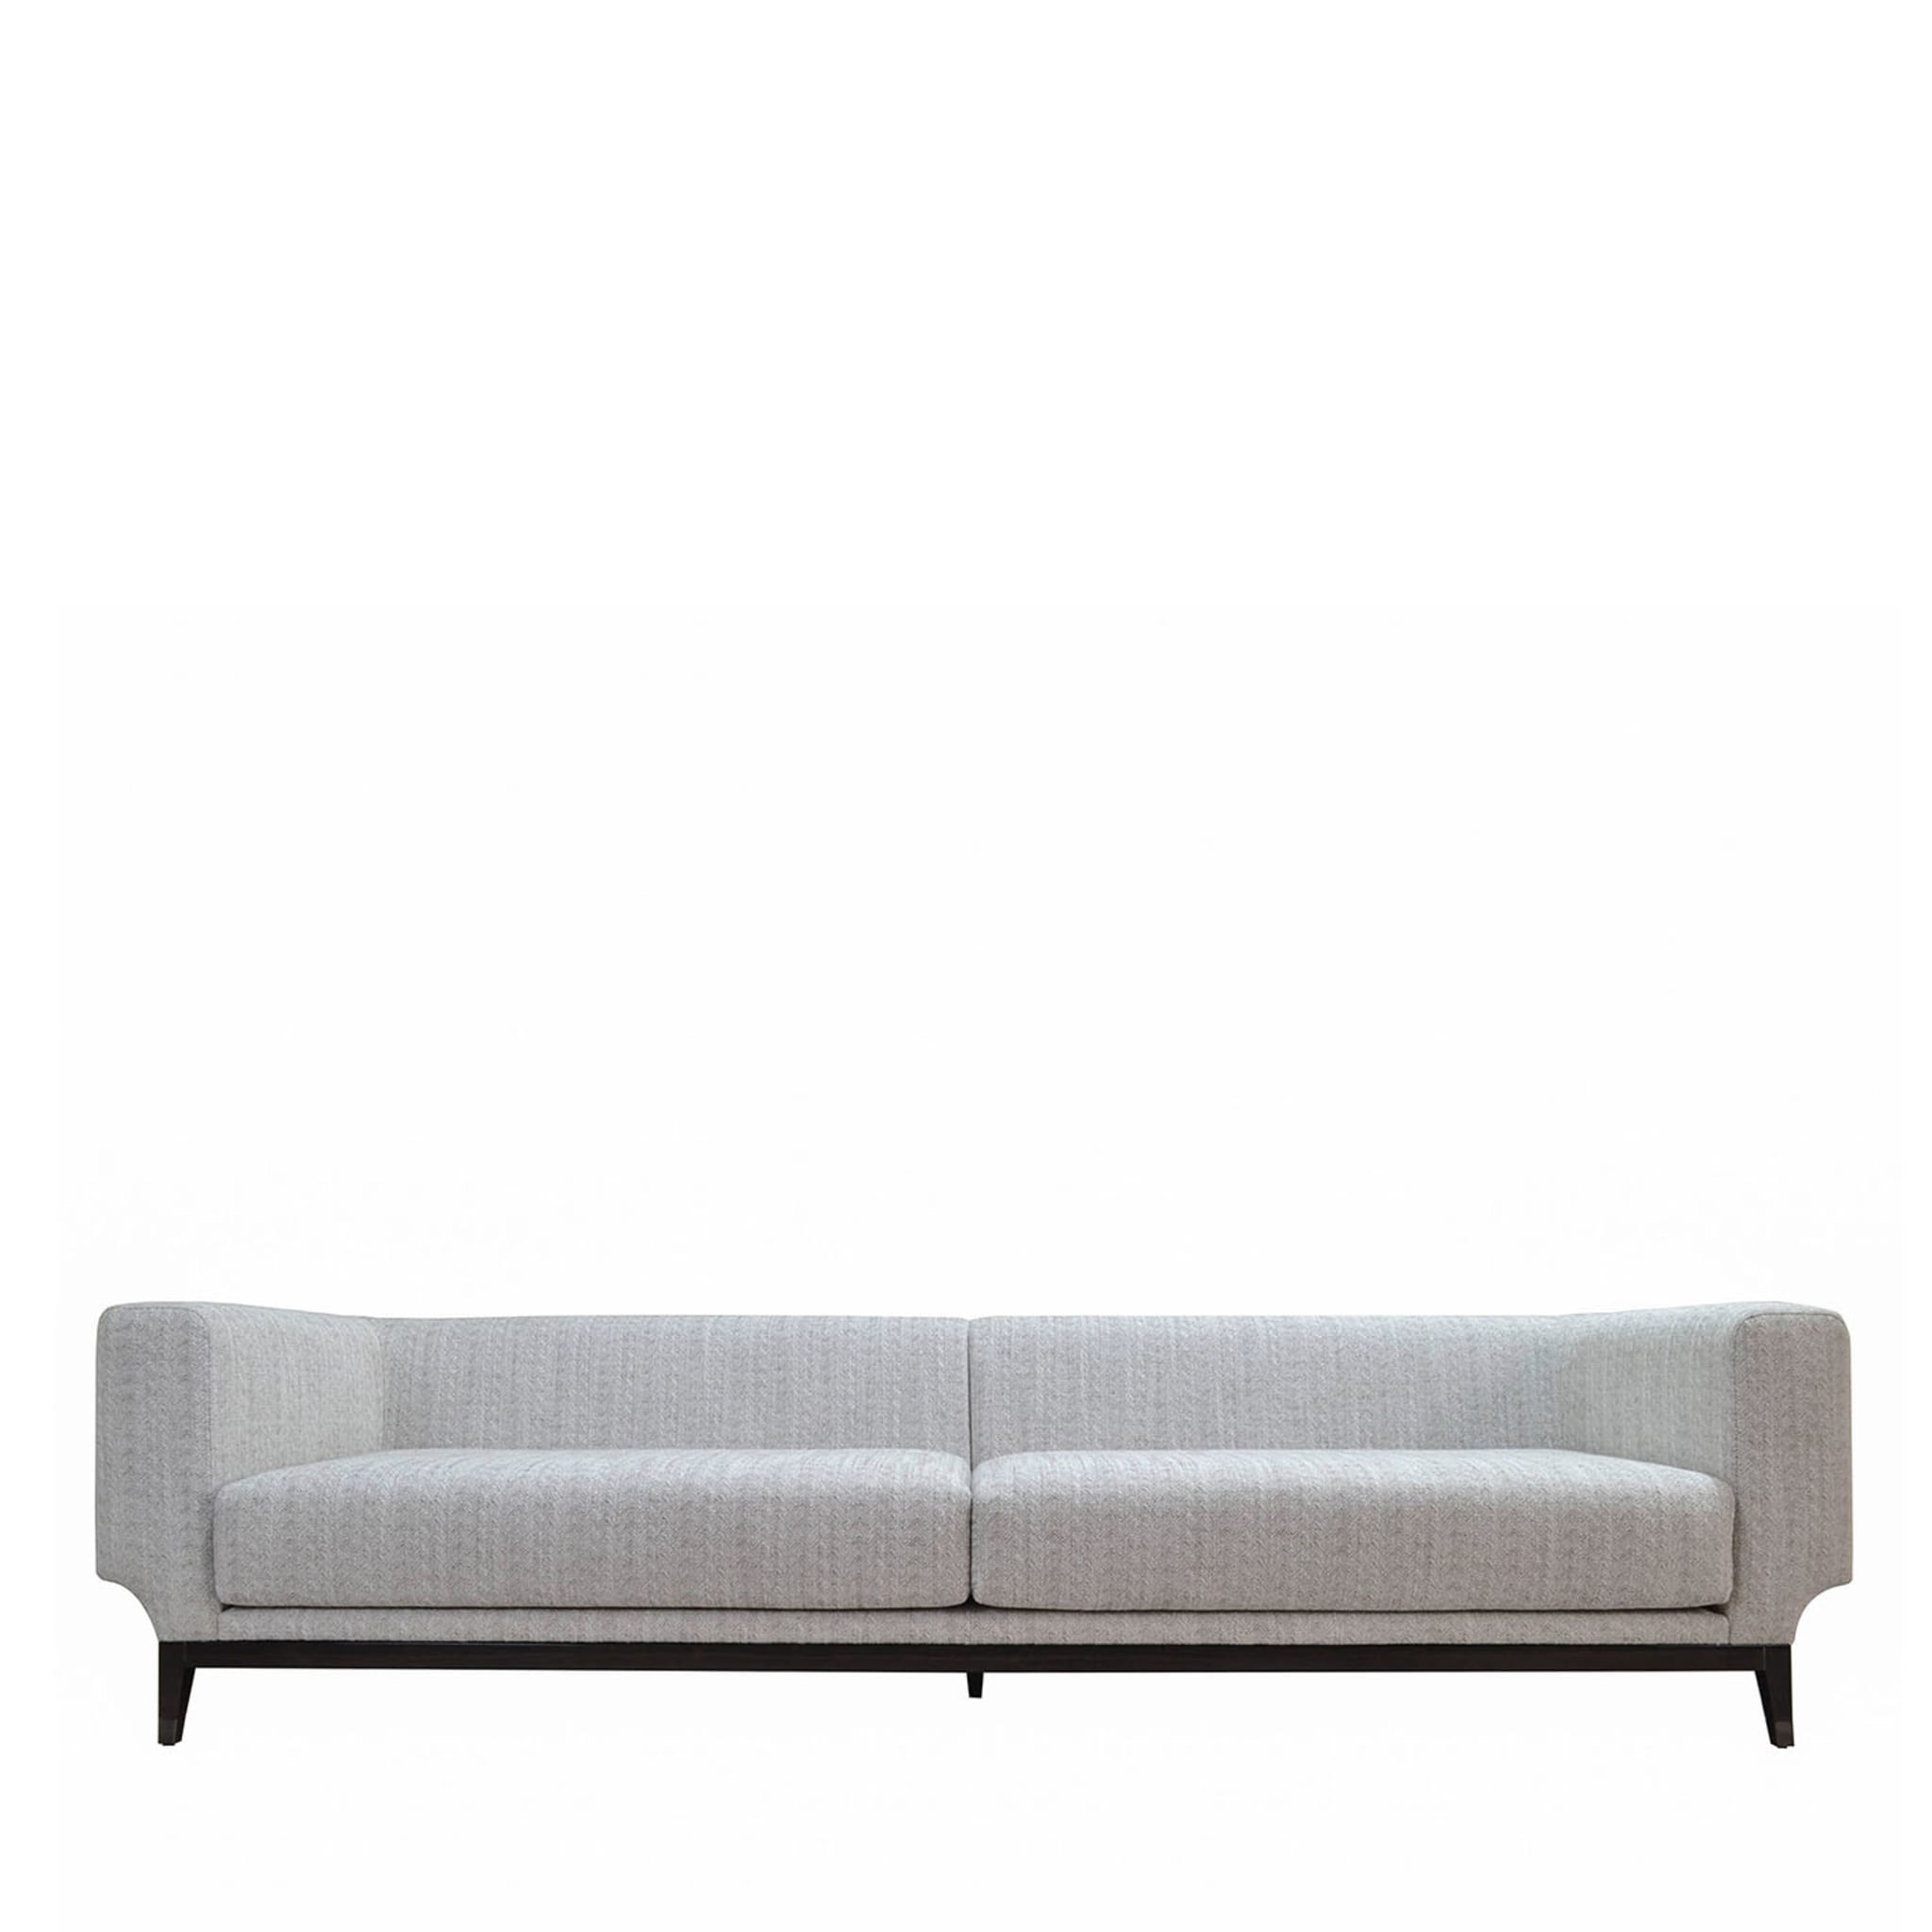 Italian Ivory Sofa 280 with Brown Wooden Base - Main view